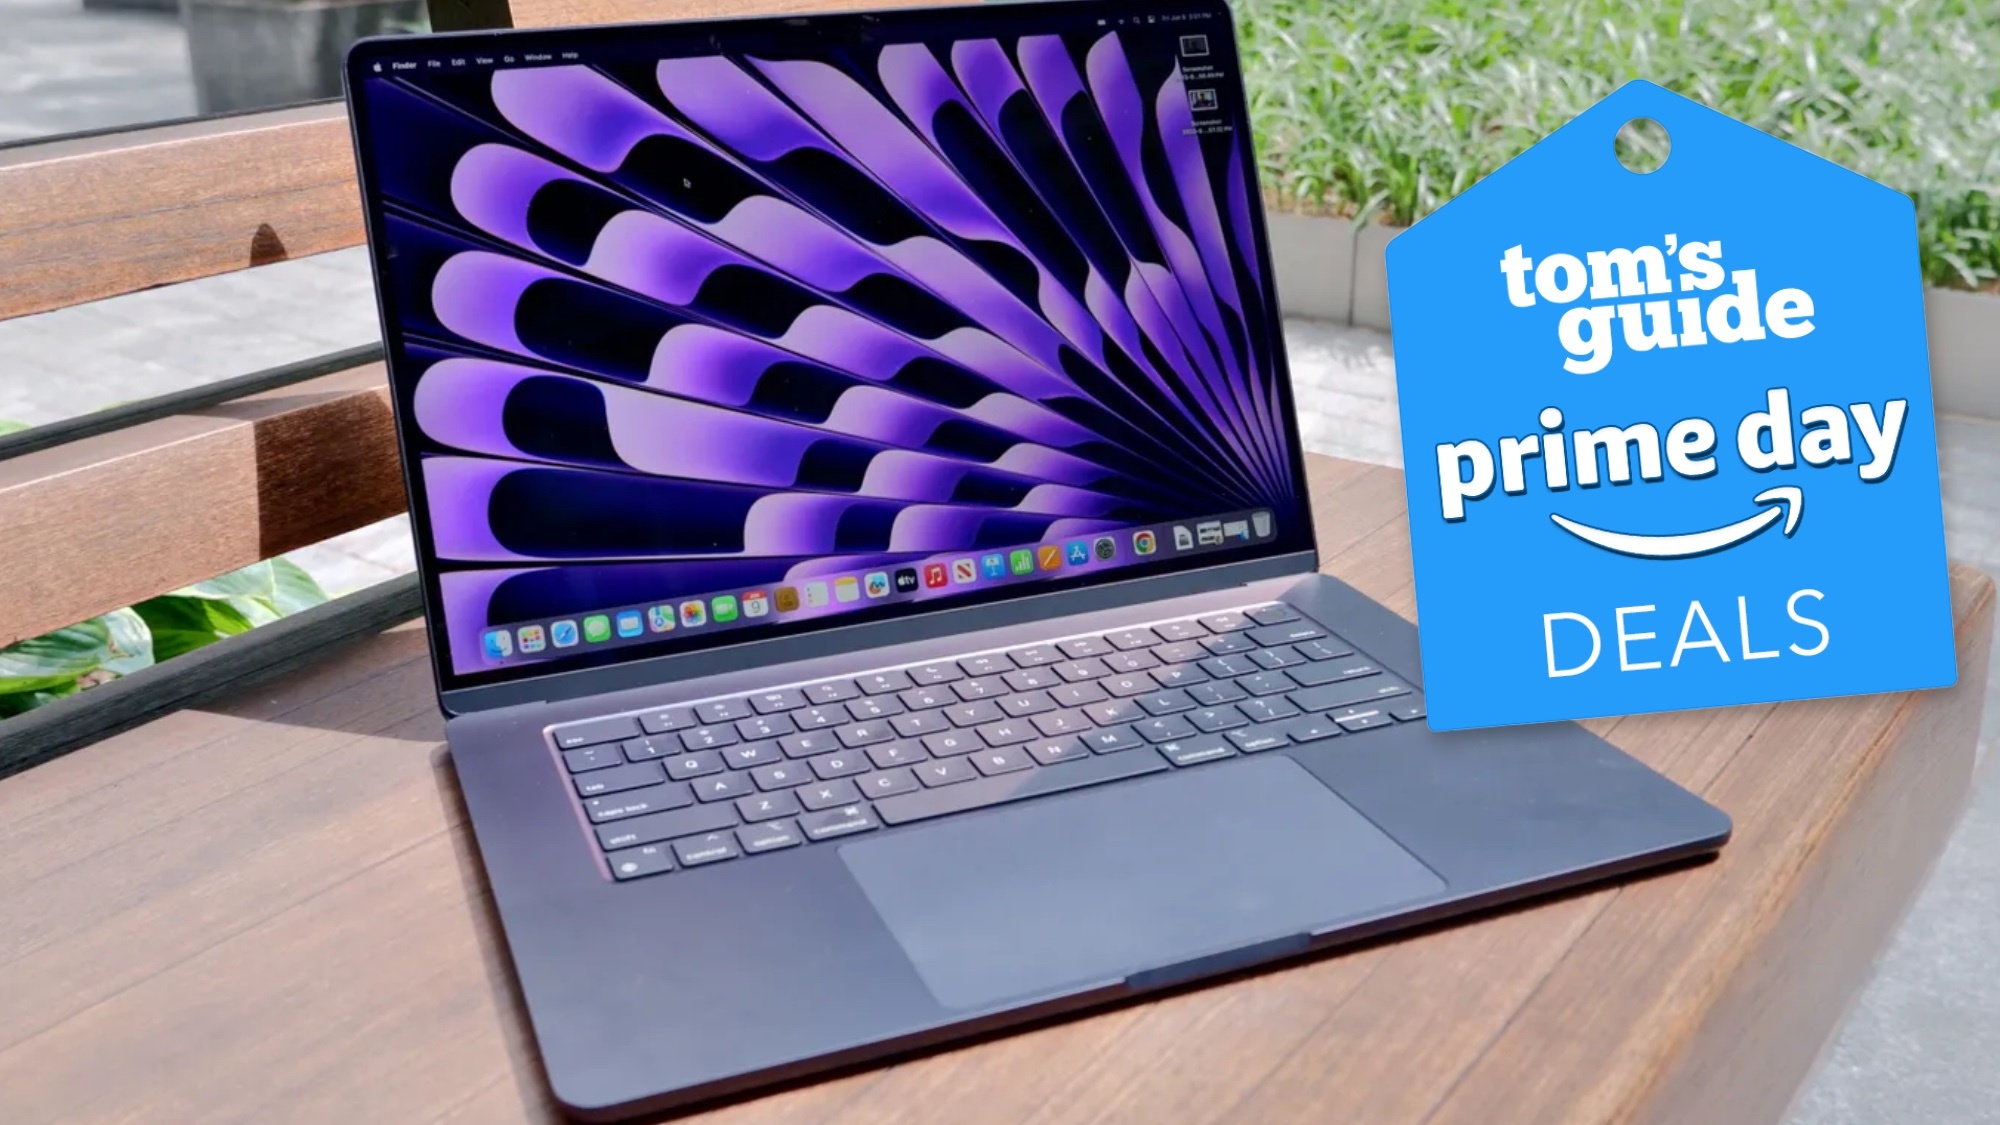 Best MacBook deal: The M1 MacBook Air is back at Prime Day pricing